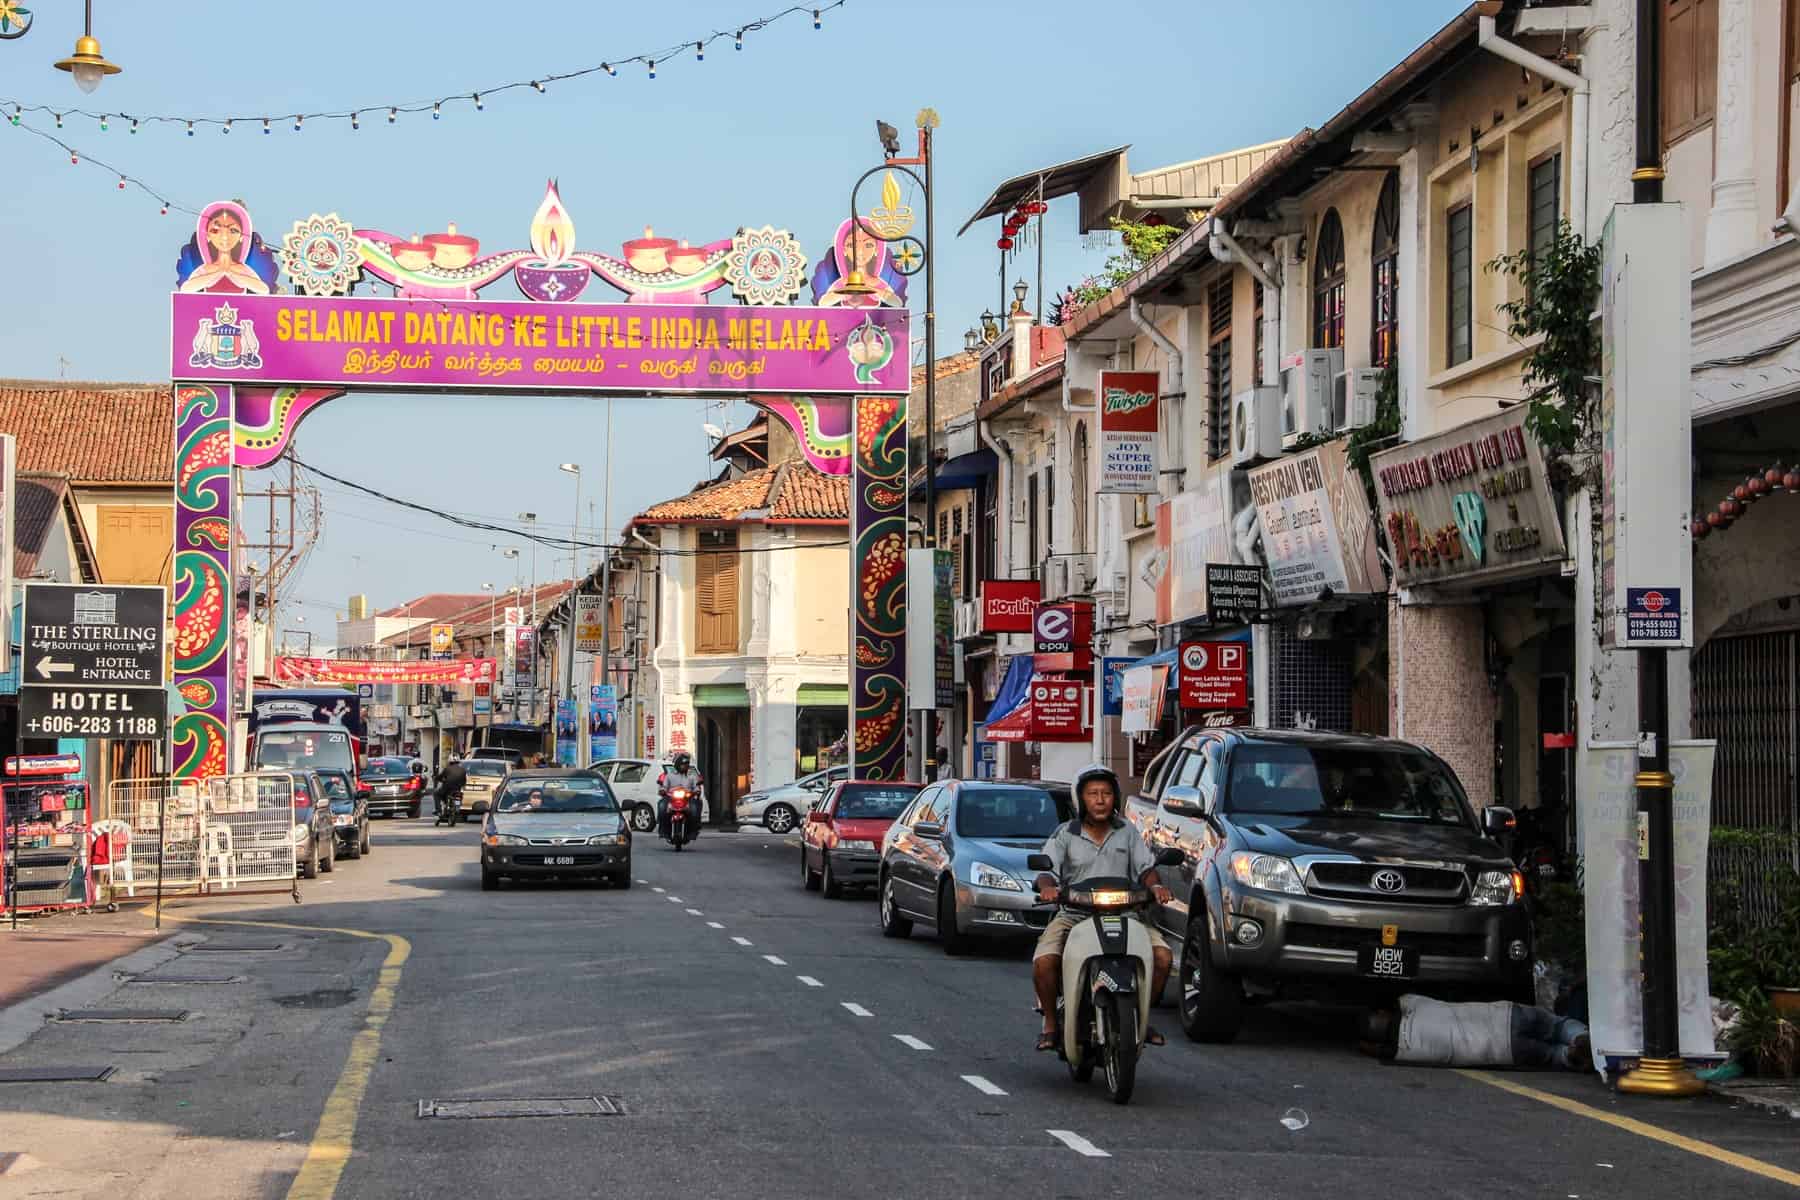 The pink street sign welcoming visitors to the designated Little India neighbourhood in Melaka, Malaysia